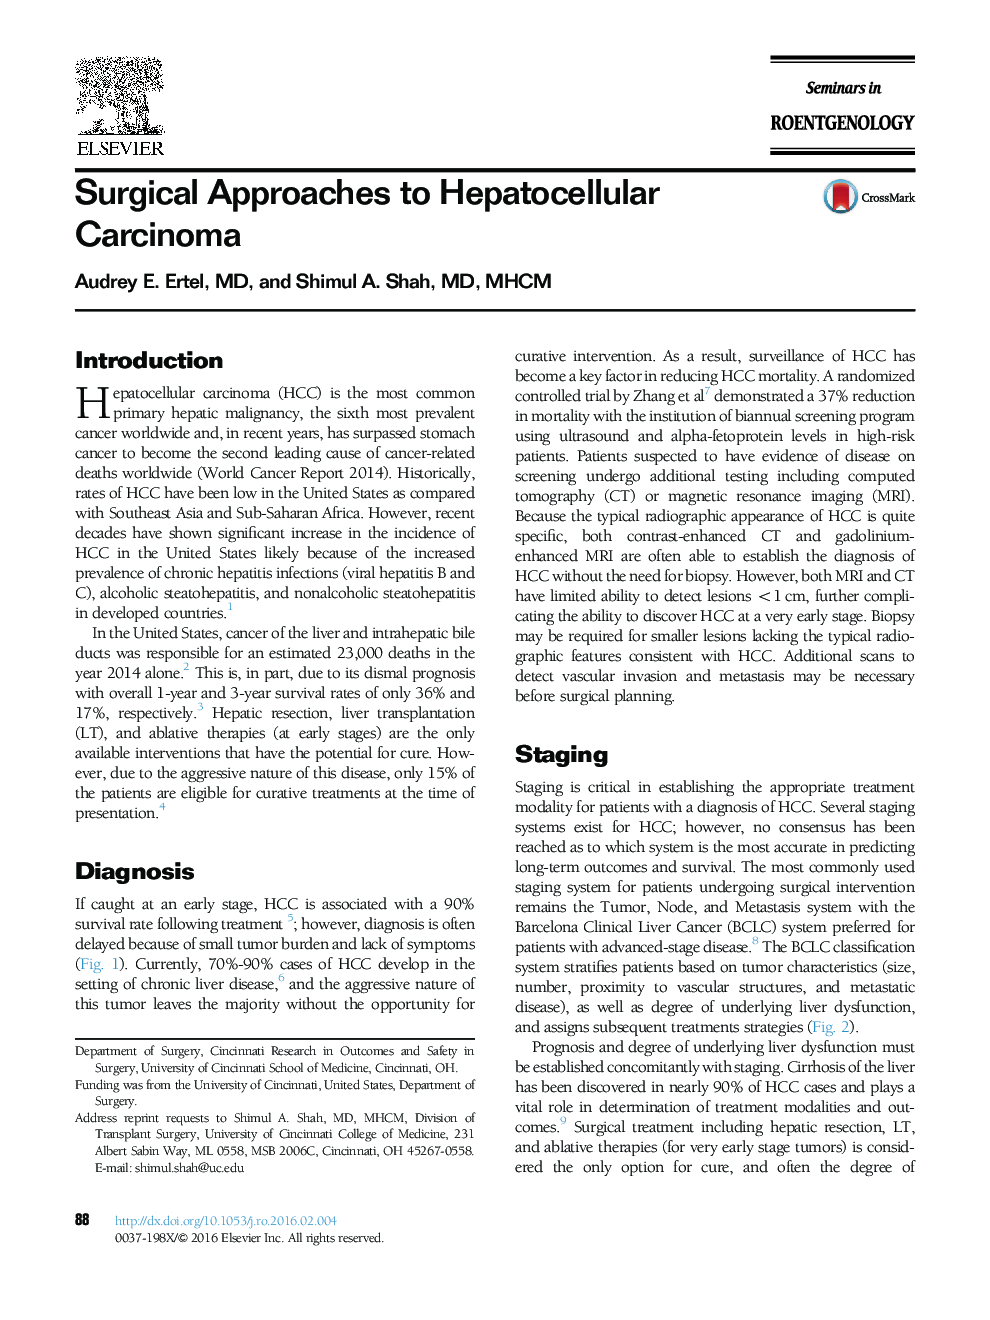 Surgical Approaches to Hepatocellular Carcinoma